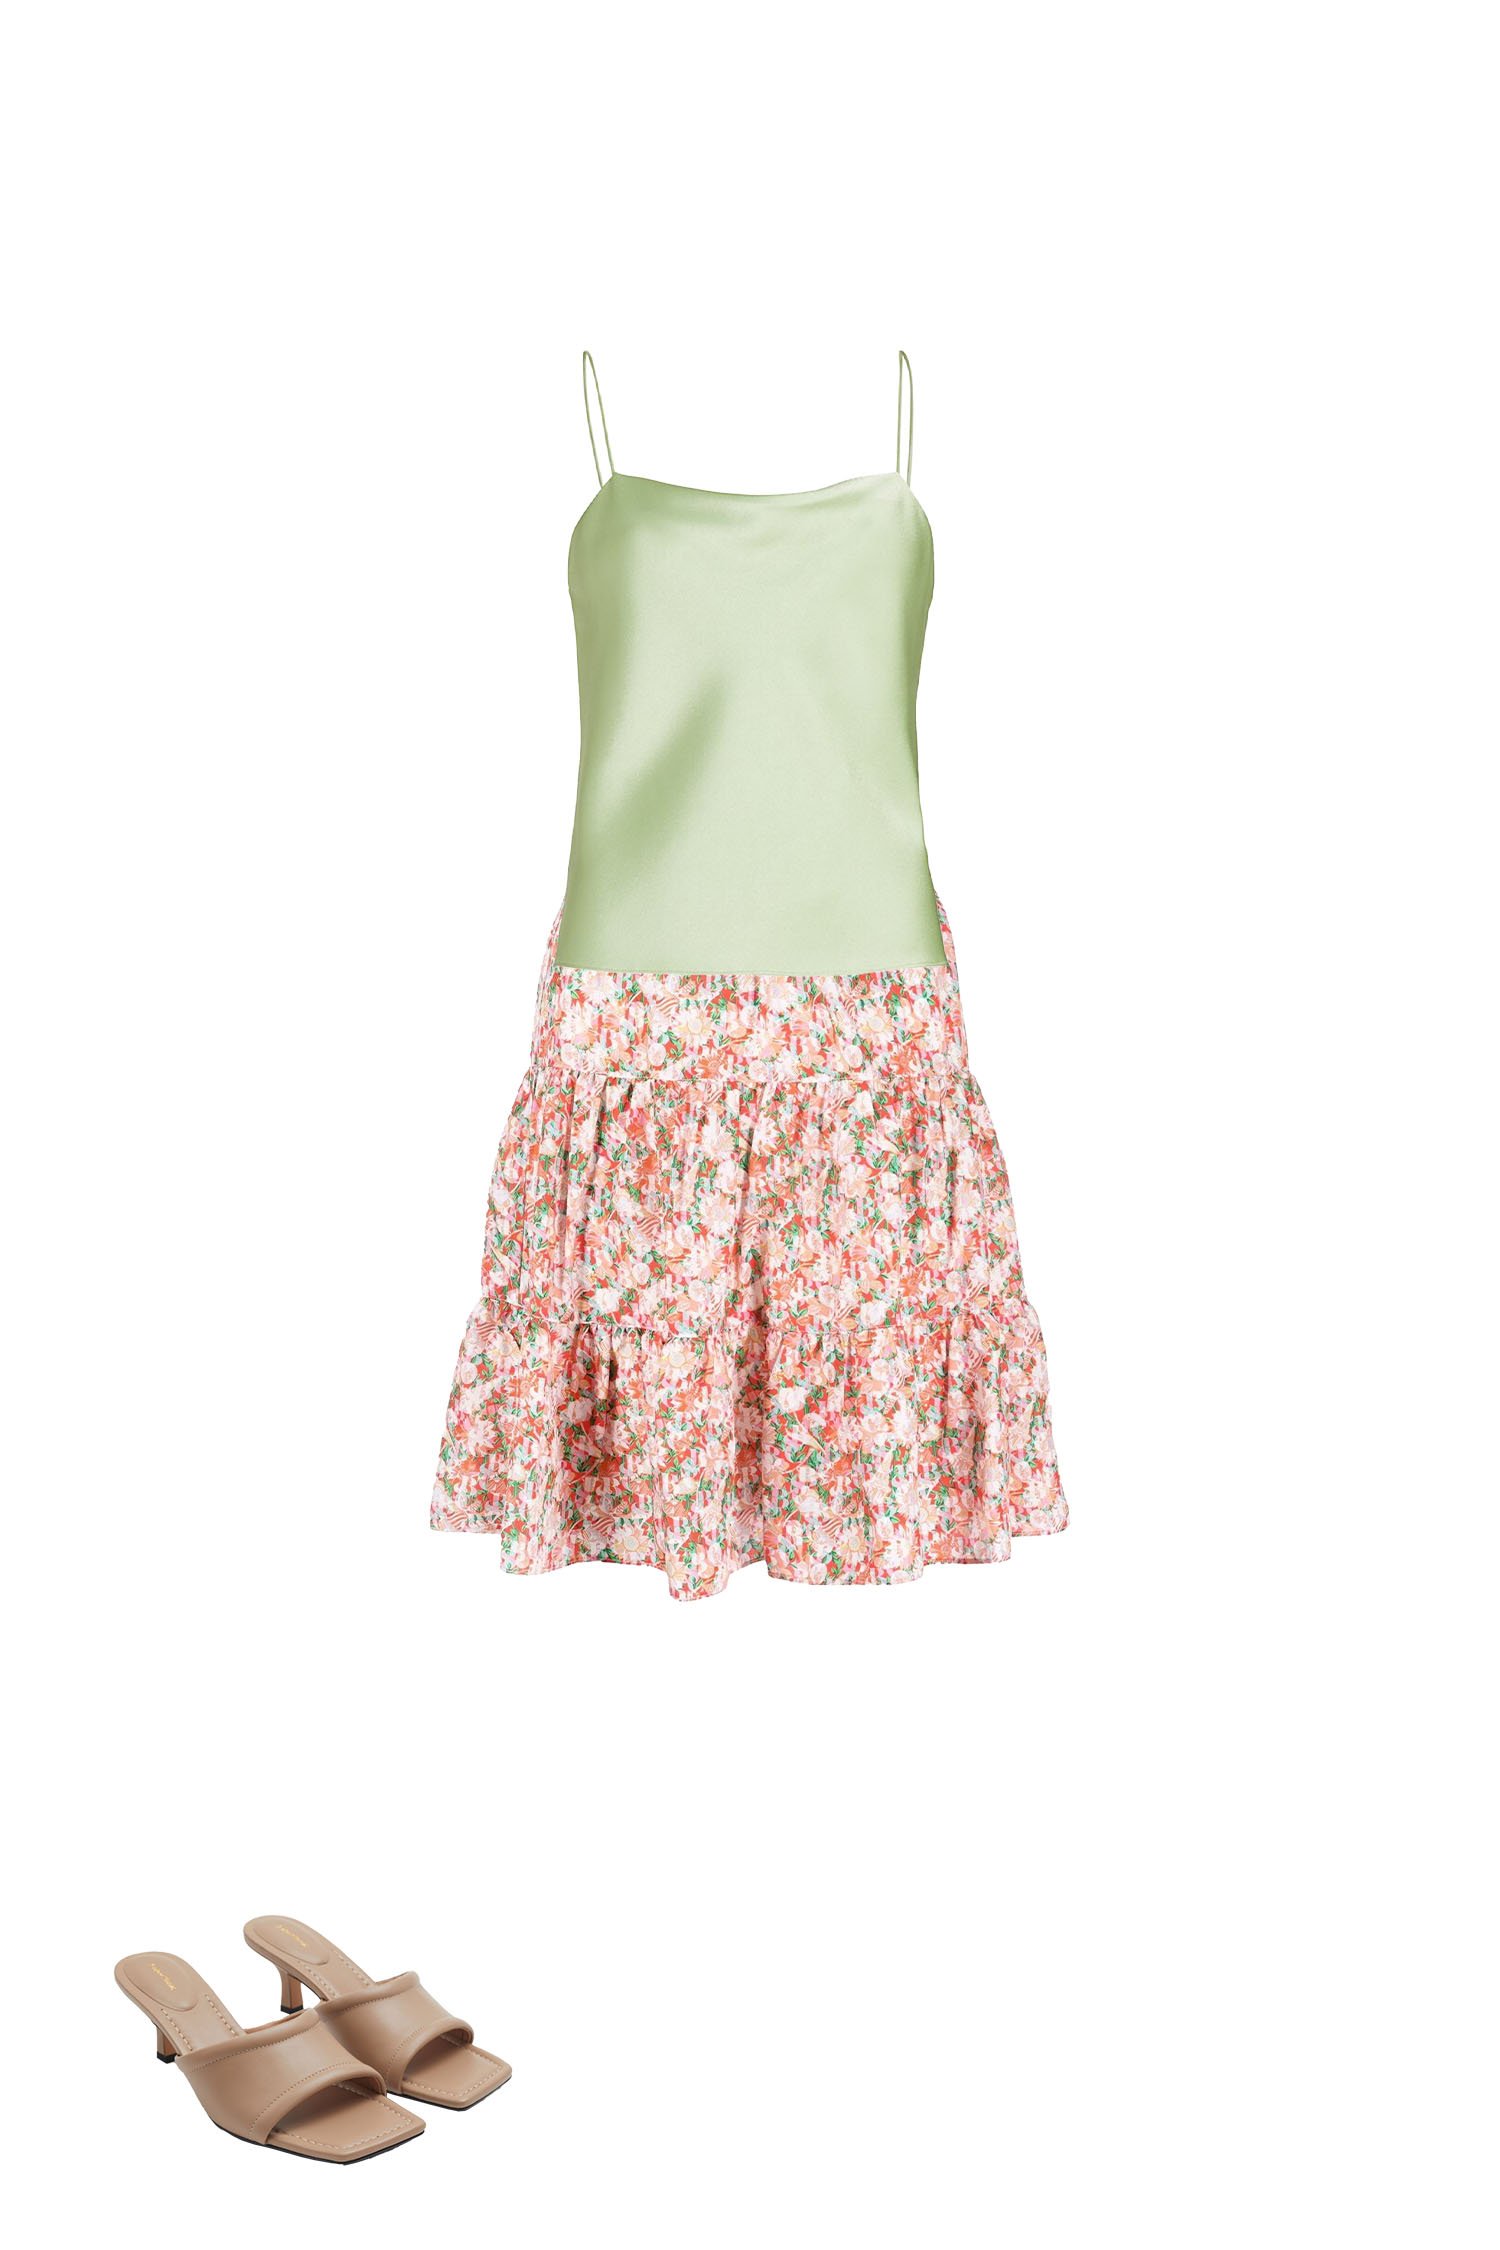 Pink Floral Print Skirt with Light Green Camisole Top Outfit